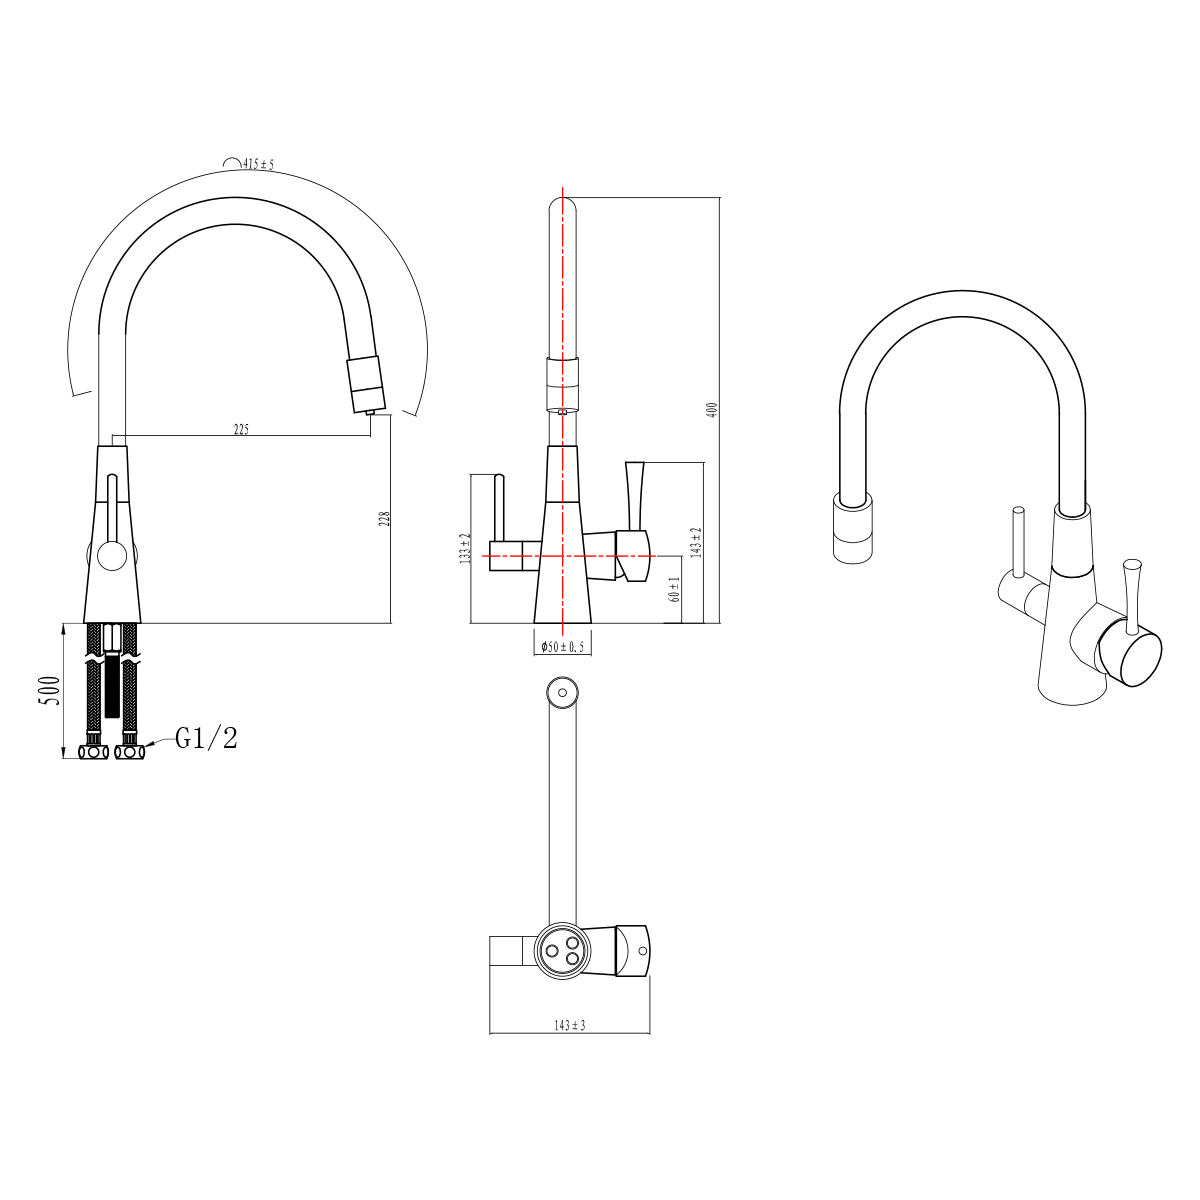 LM3075C-Yellow Kitchen faucet with connection to drinking 
water supply